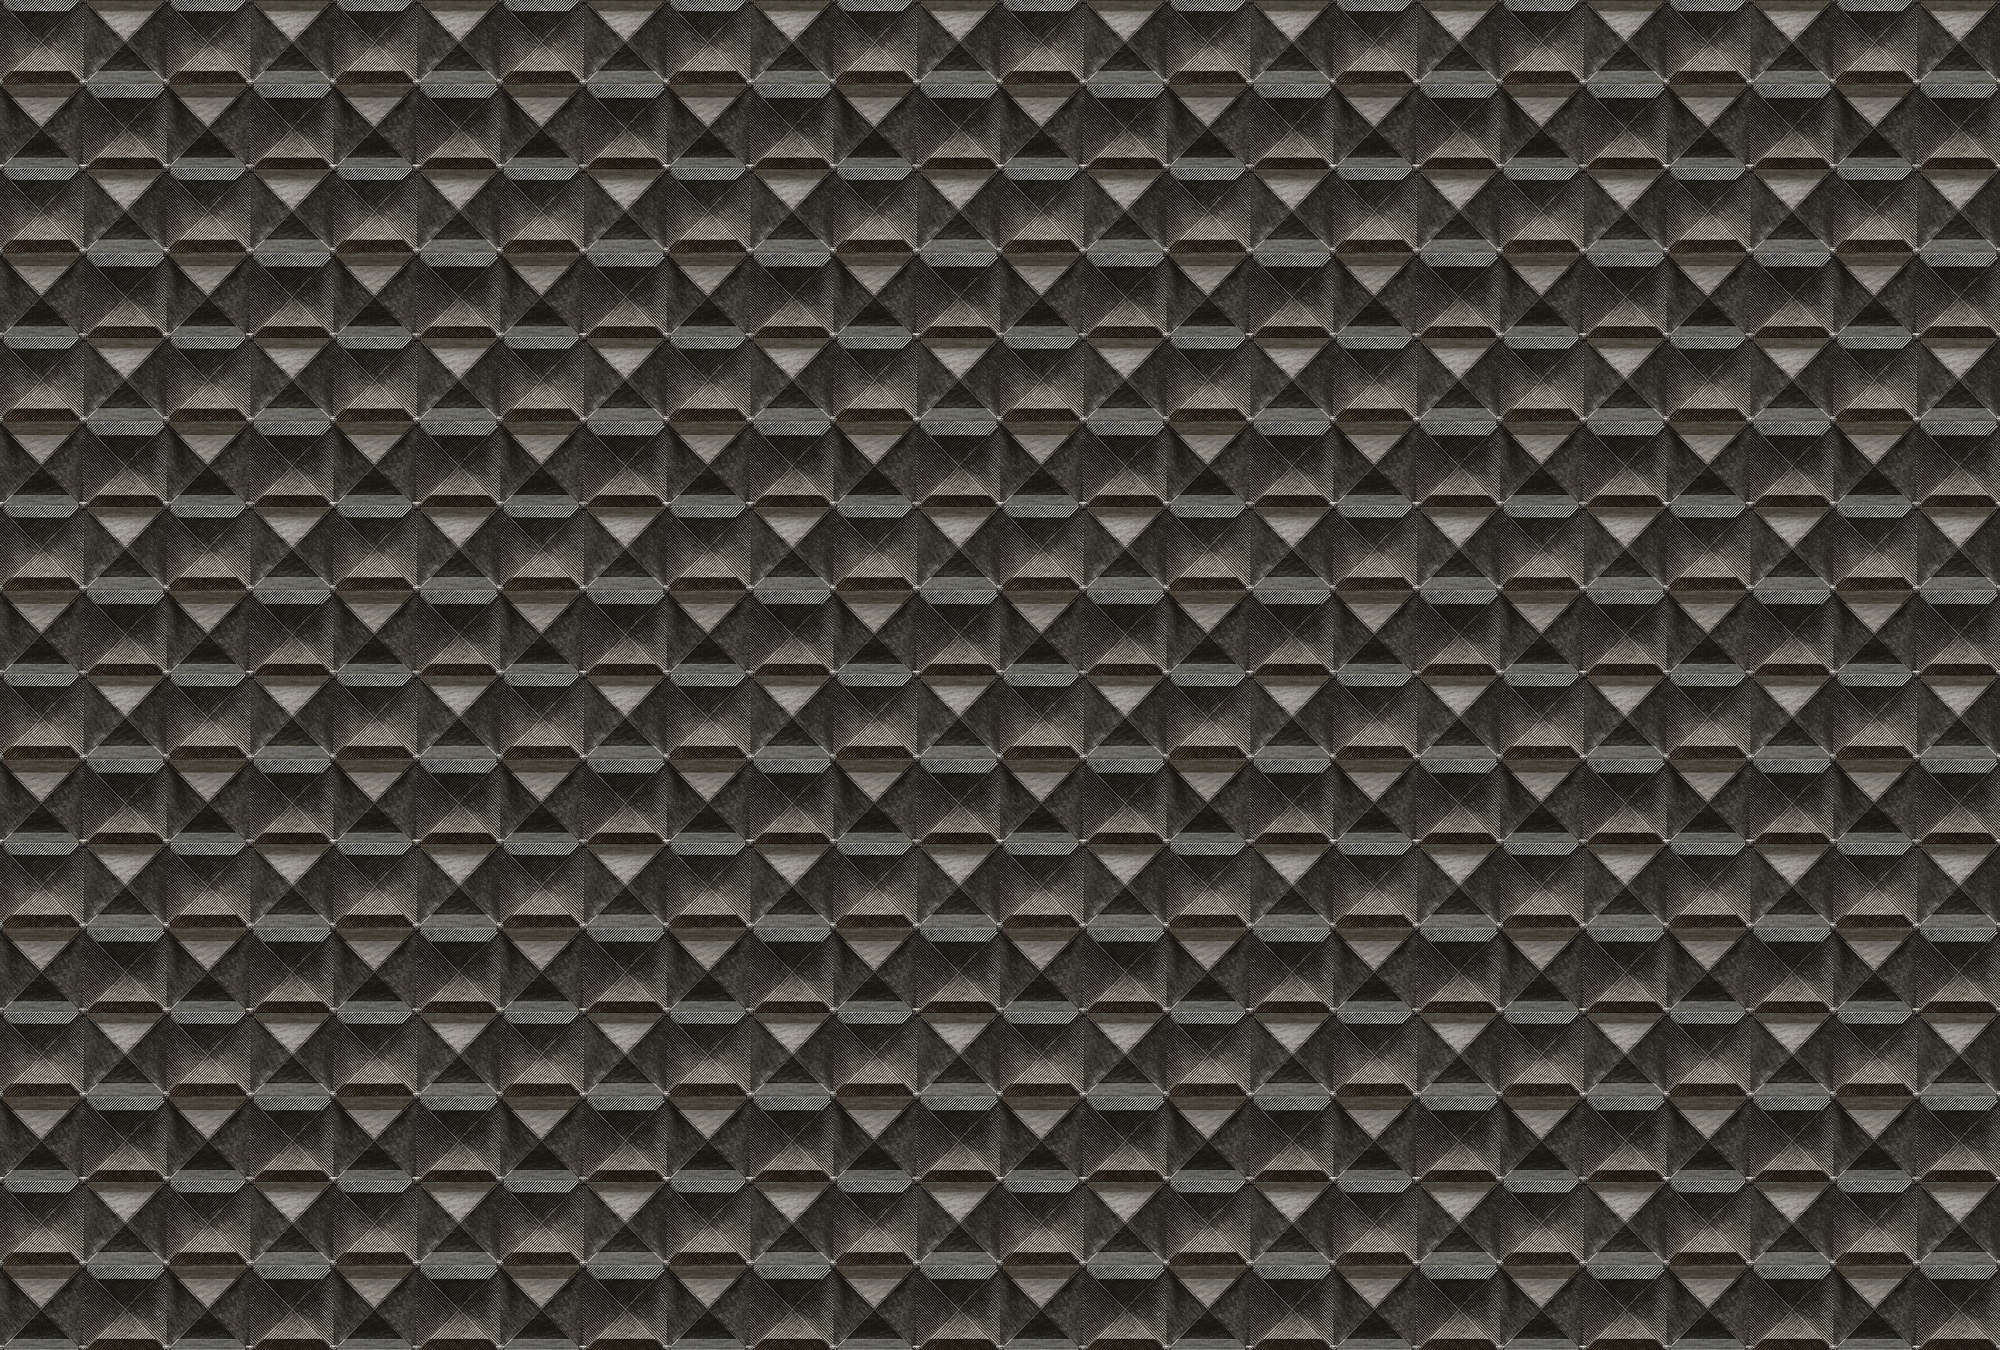             The edge 1 - 3D Photo wallpaper with rhombus metal design - Brown, Black | Textured non-woven
        